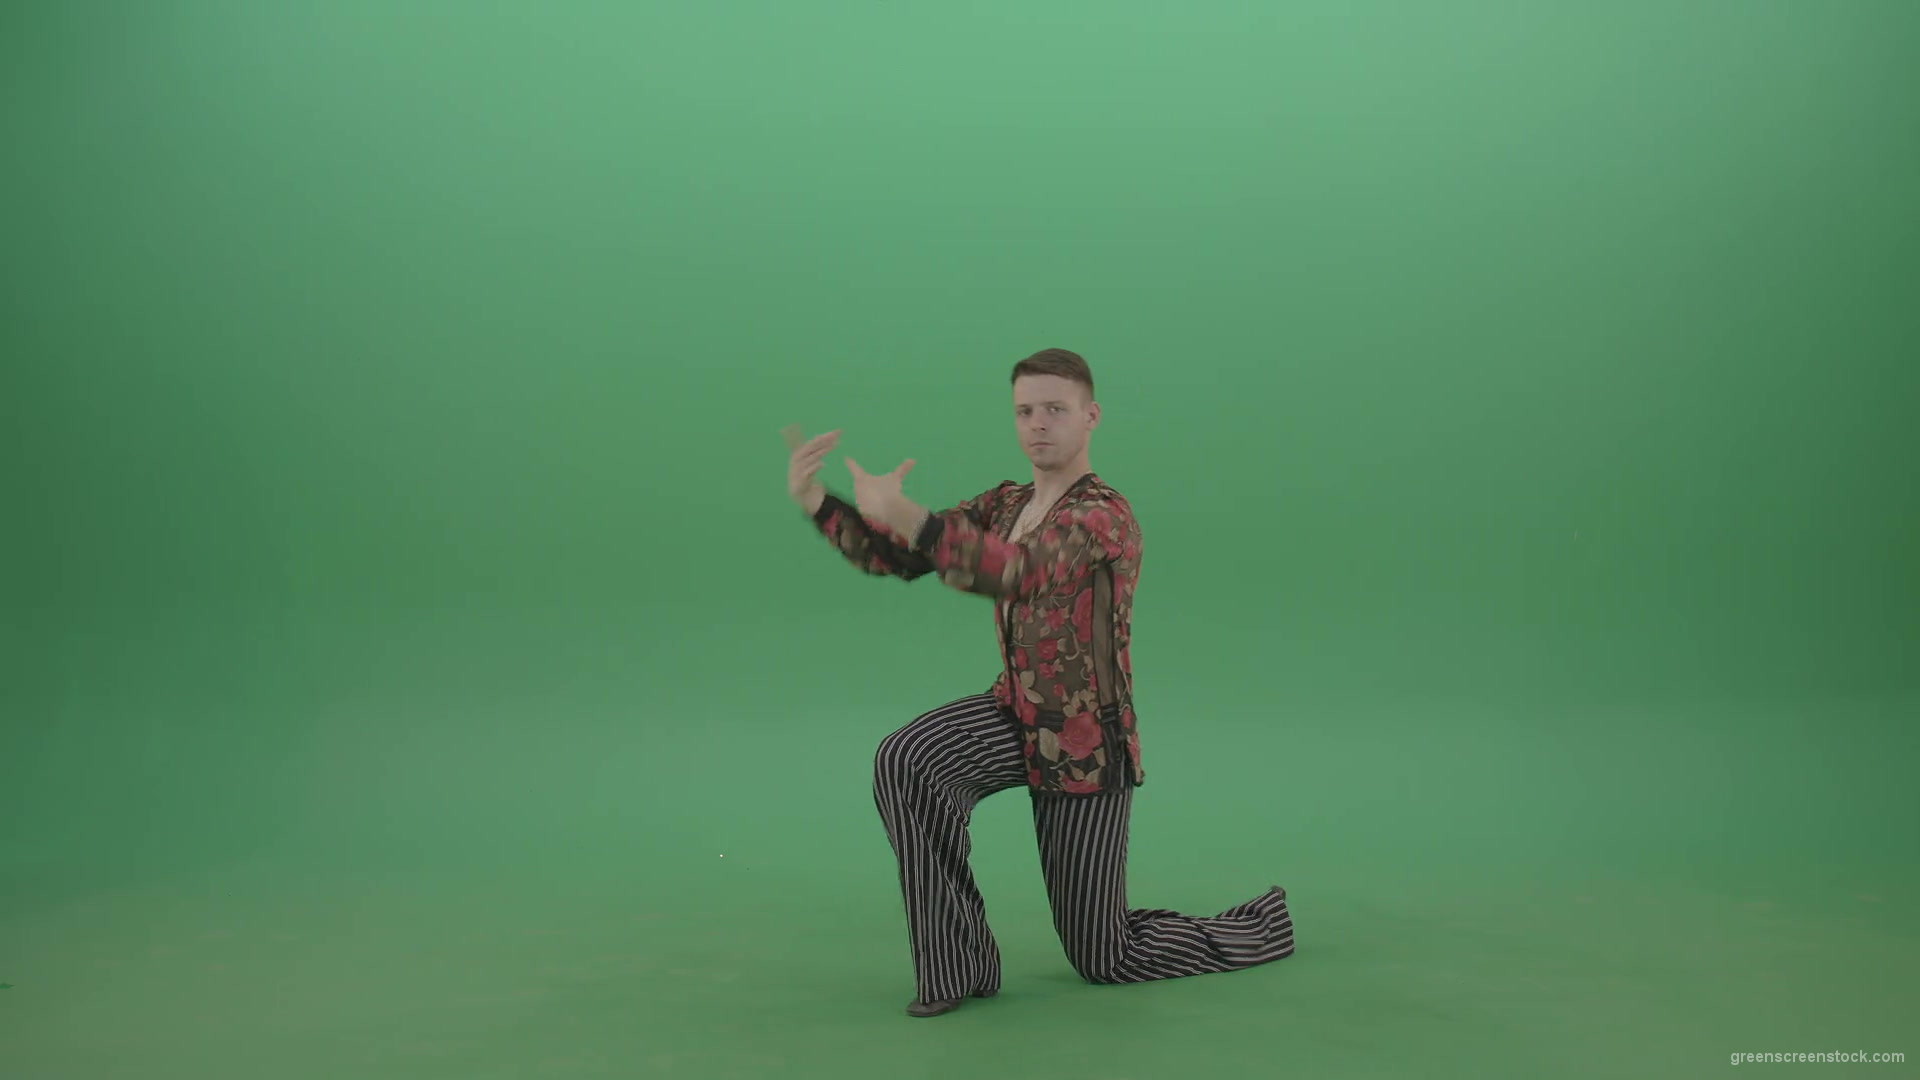 Rumba-Man-get-down-on-one-knees-and-clapping-in-hands-over-green-screen-4K-Video-Footage--1920_008 Green Screen Stock